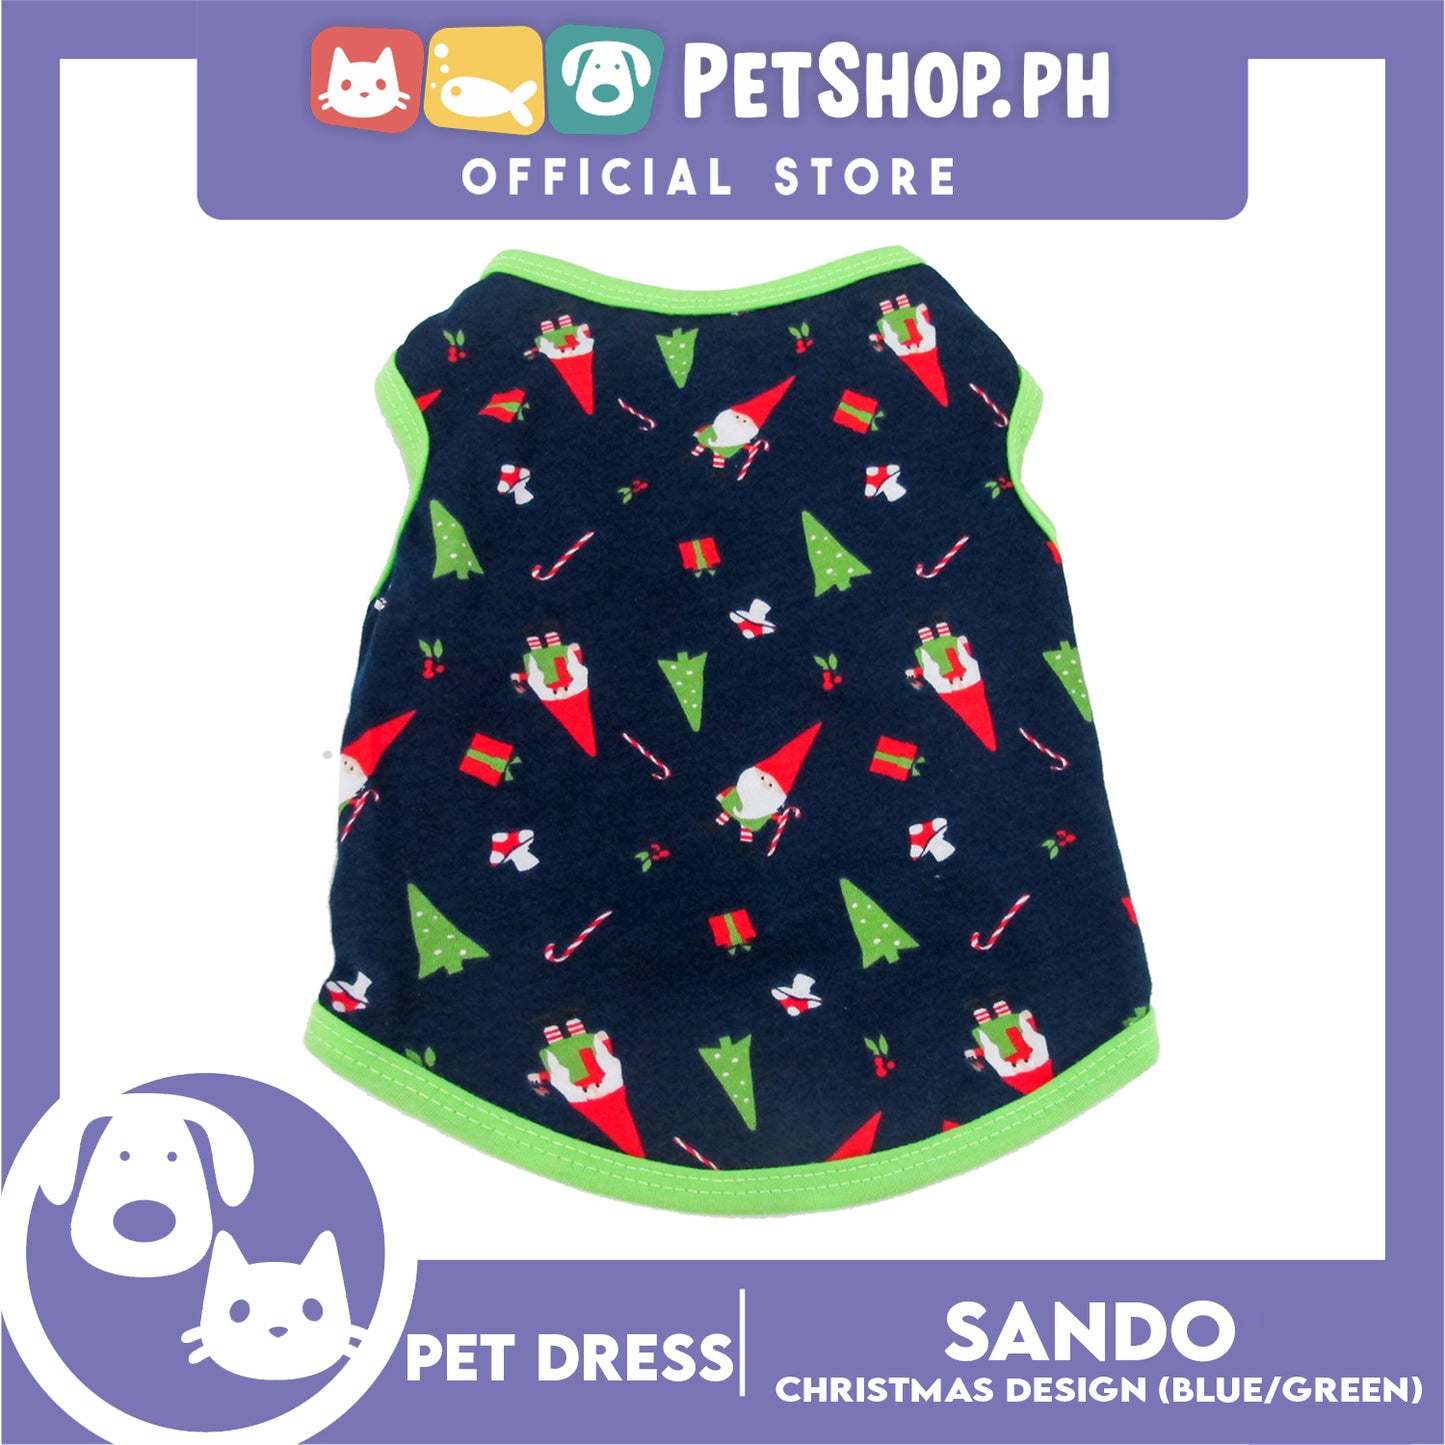 Pet Shirt Christmas Design with Green Piping Sleeveless (Medium) for Puppy, Small Dog & Cats- Sando Breathable Clothes, Pet T-shirt, Sweatshirt